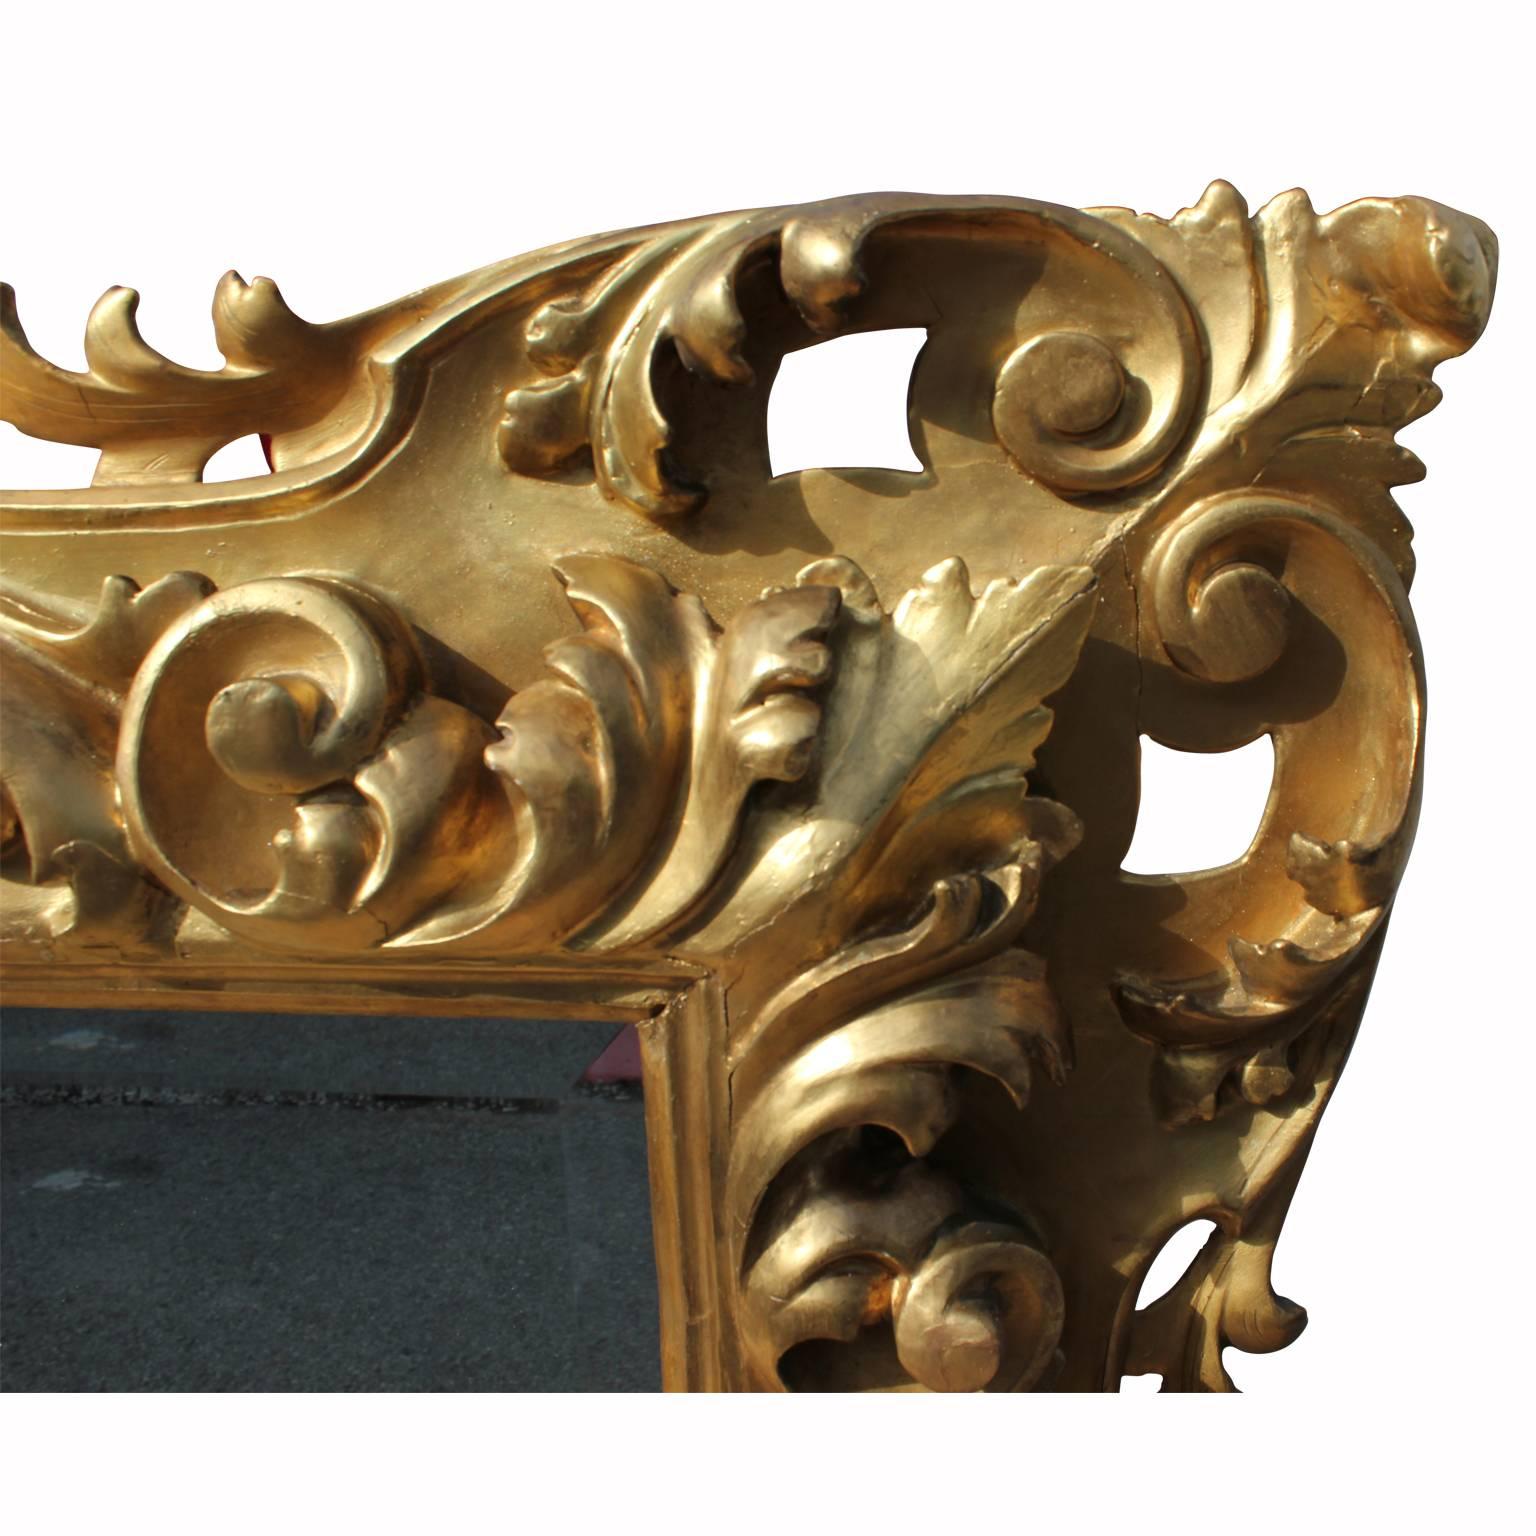 Monumental ornate French gold gilt mirror. Beautifully hand-carved from late 18th century to early 19th century. Features beveled glass and carved floral motifs.